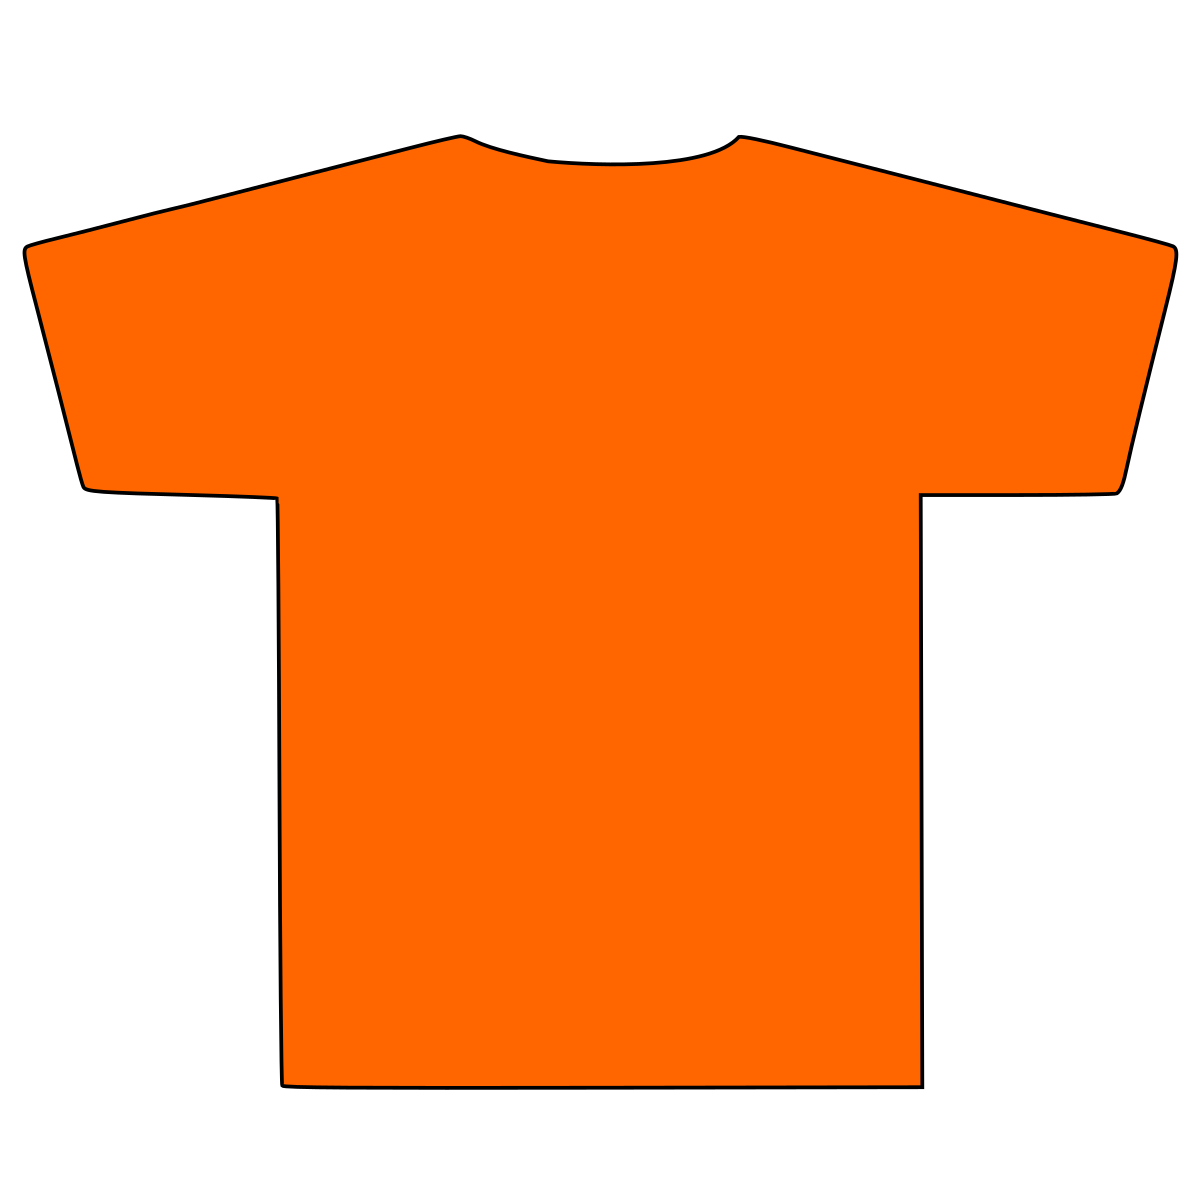 File T Shirt Silhouette Svg Wikimedia Commons